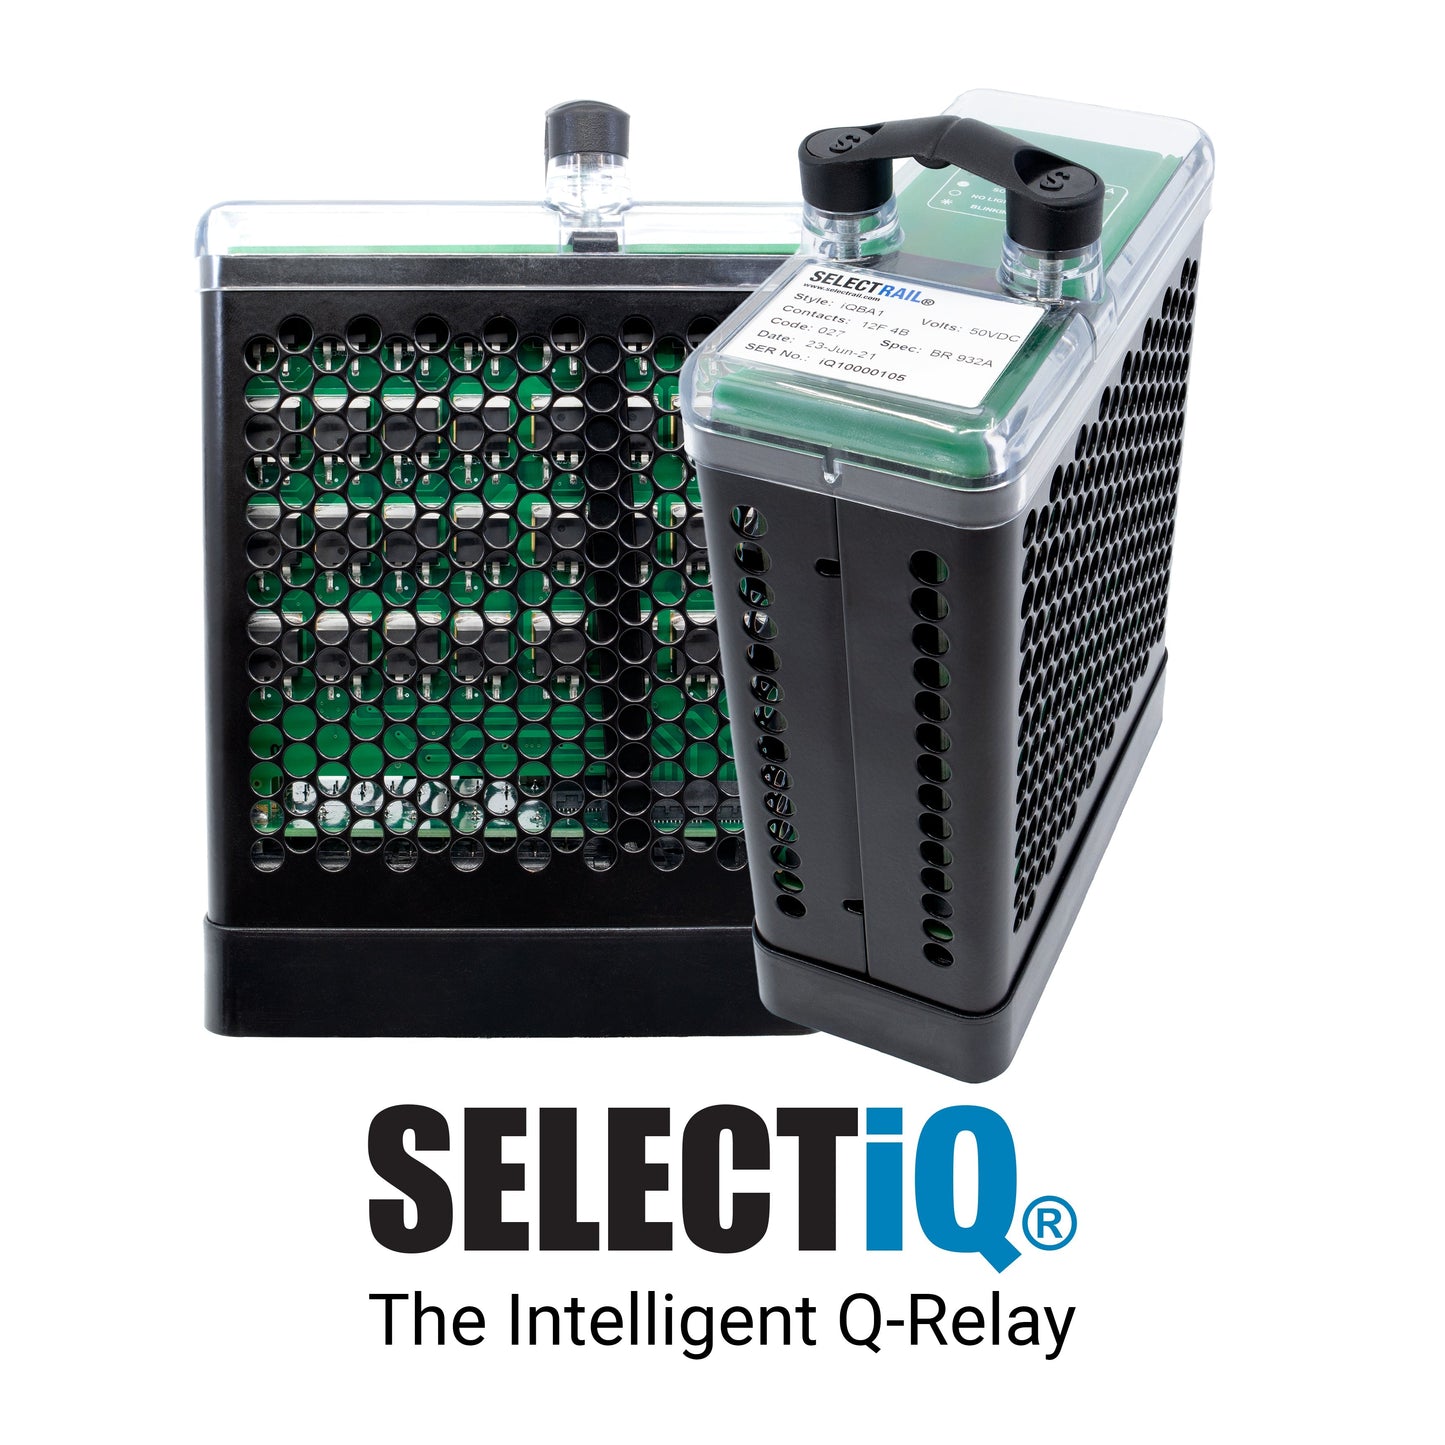 SELECTiQ Solid State Q-Relay (iQN1)